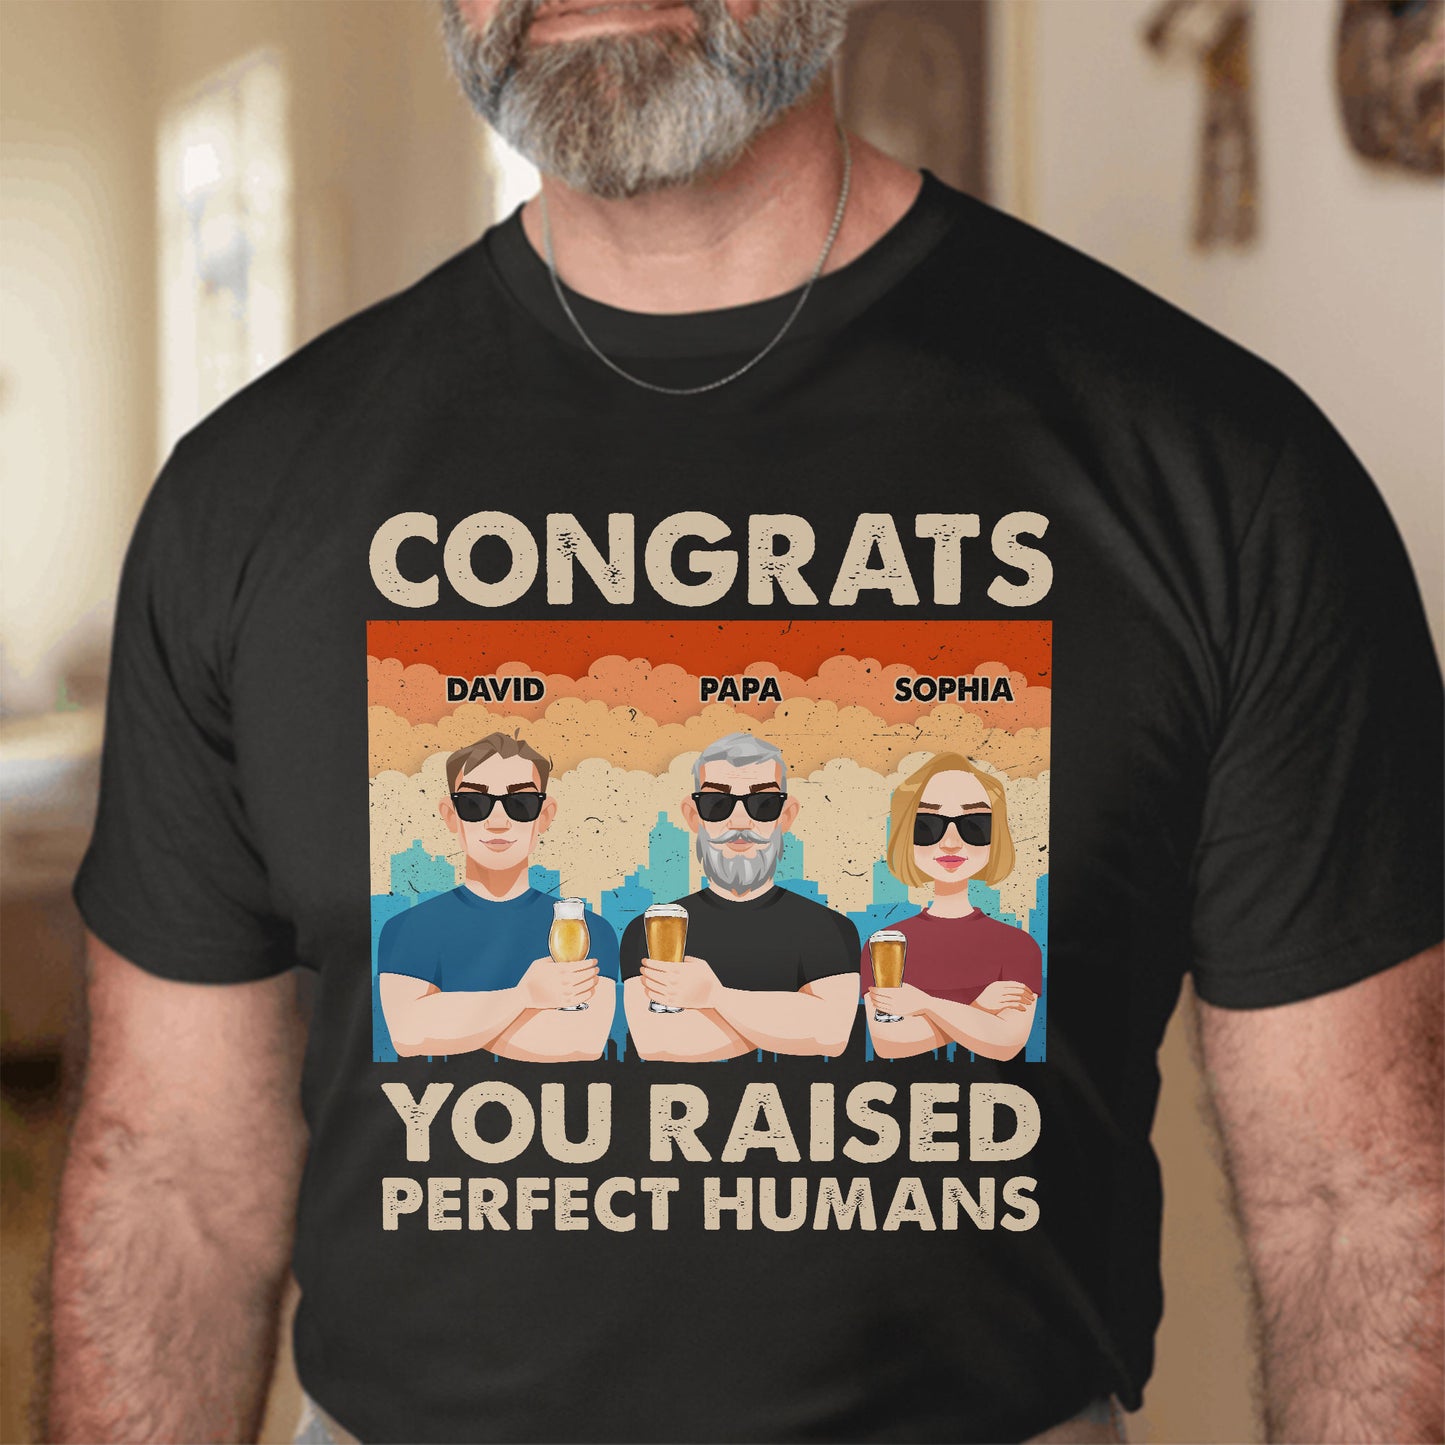 Congrats You Raised Perfect Humans - Personalized Shirt